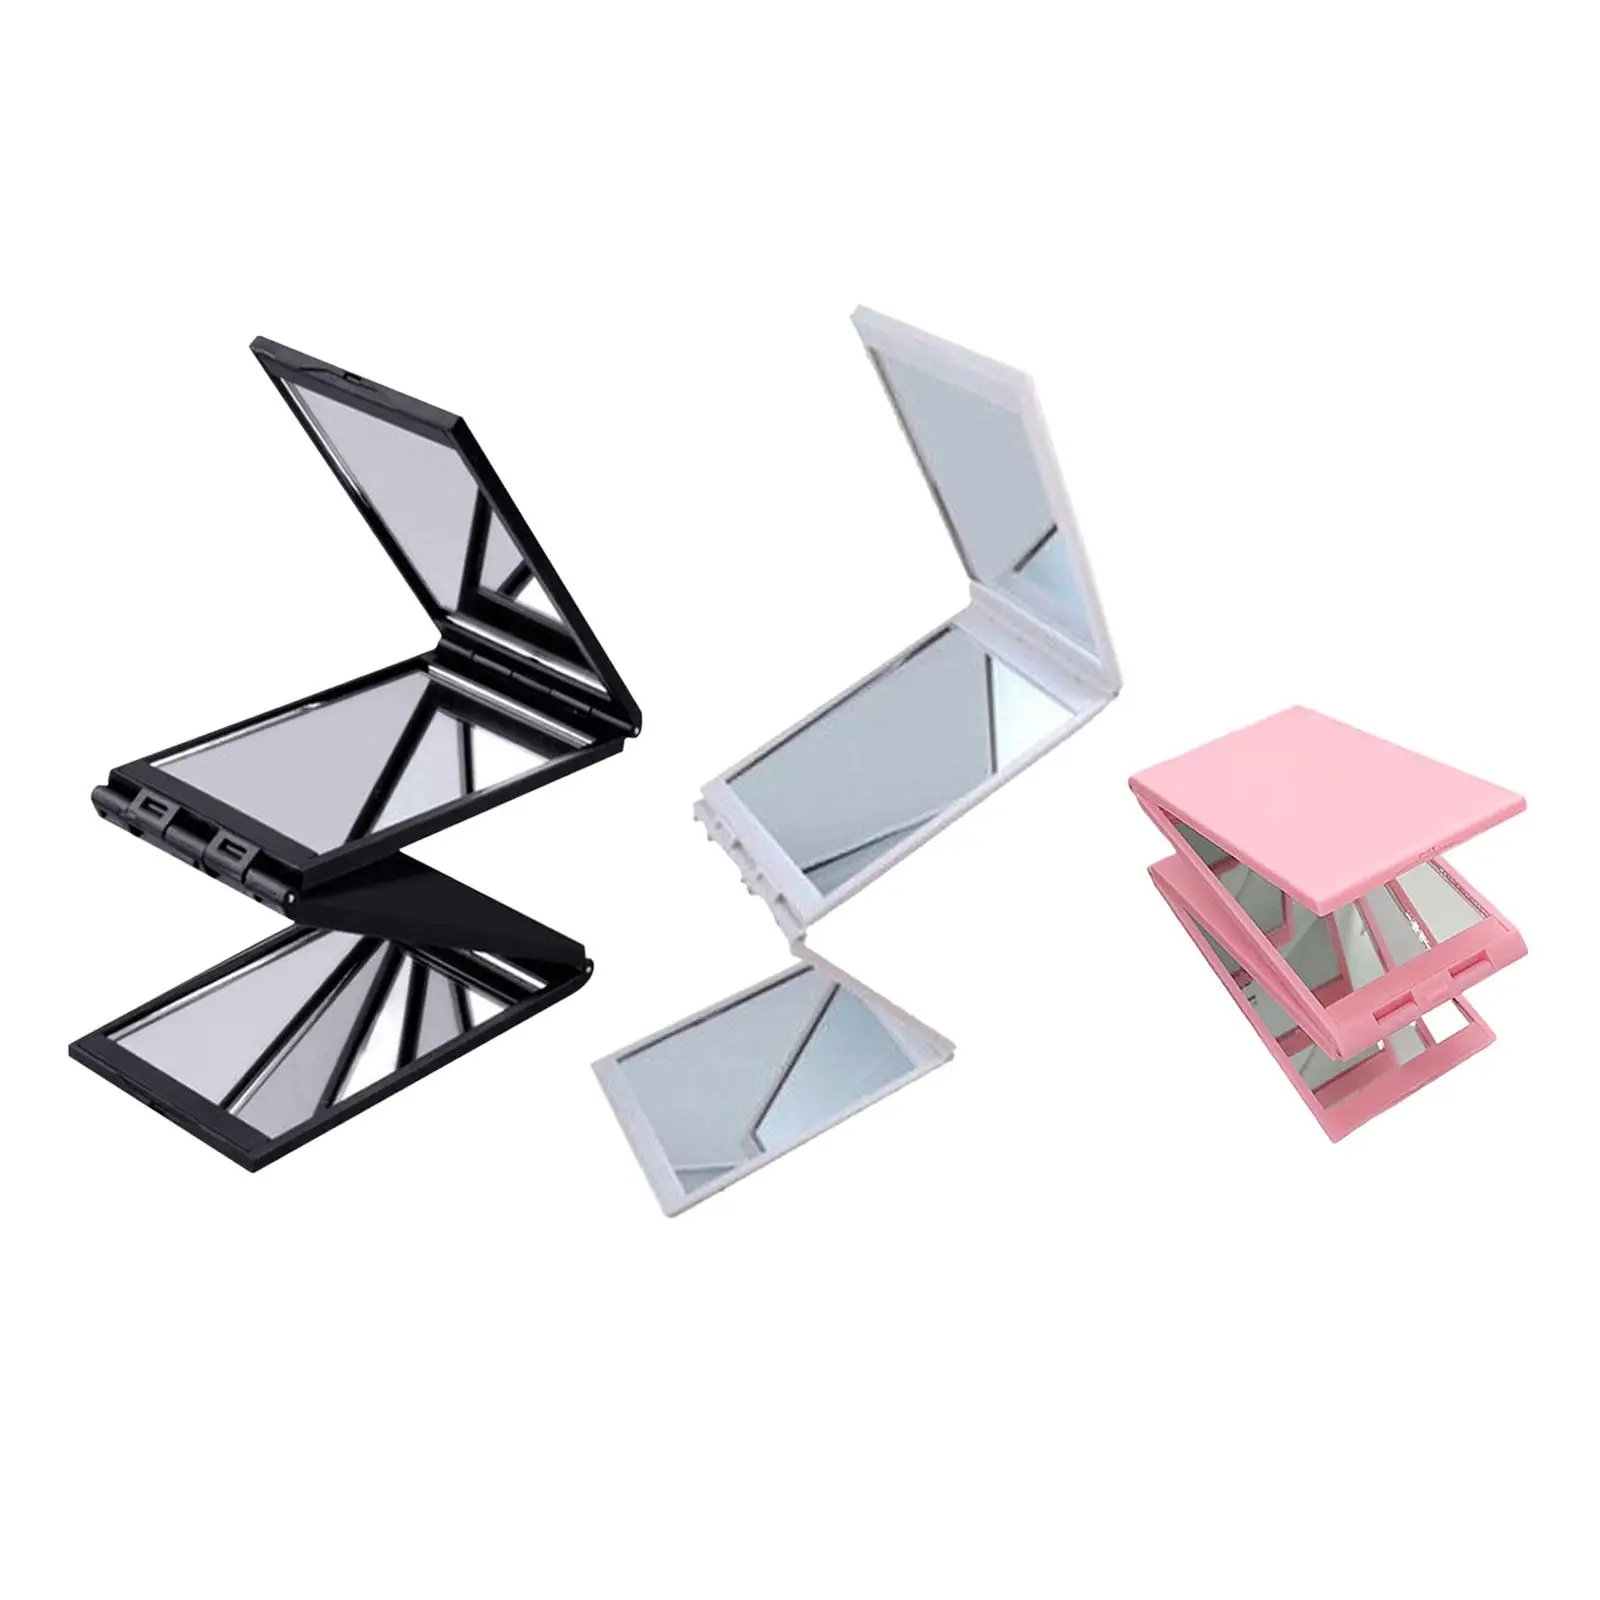 4 Sides Foldable Makeup Mirror Lady Adjustable Compact Mirror Cosmetic Vanity Mirror for Shaving Skincare Home Hair Styling SPA